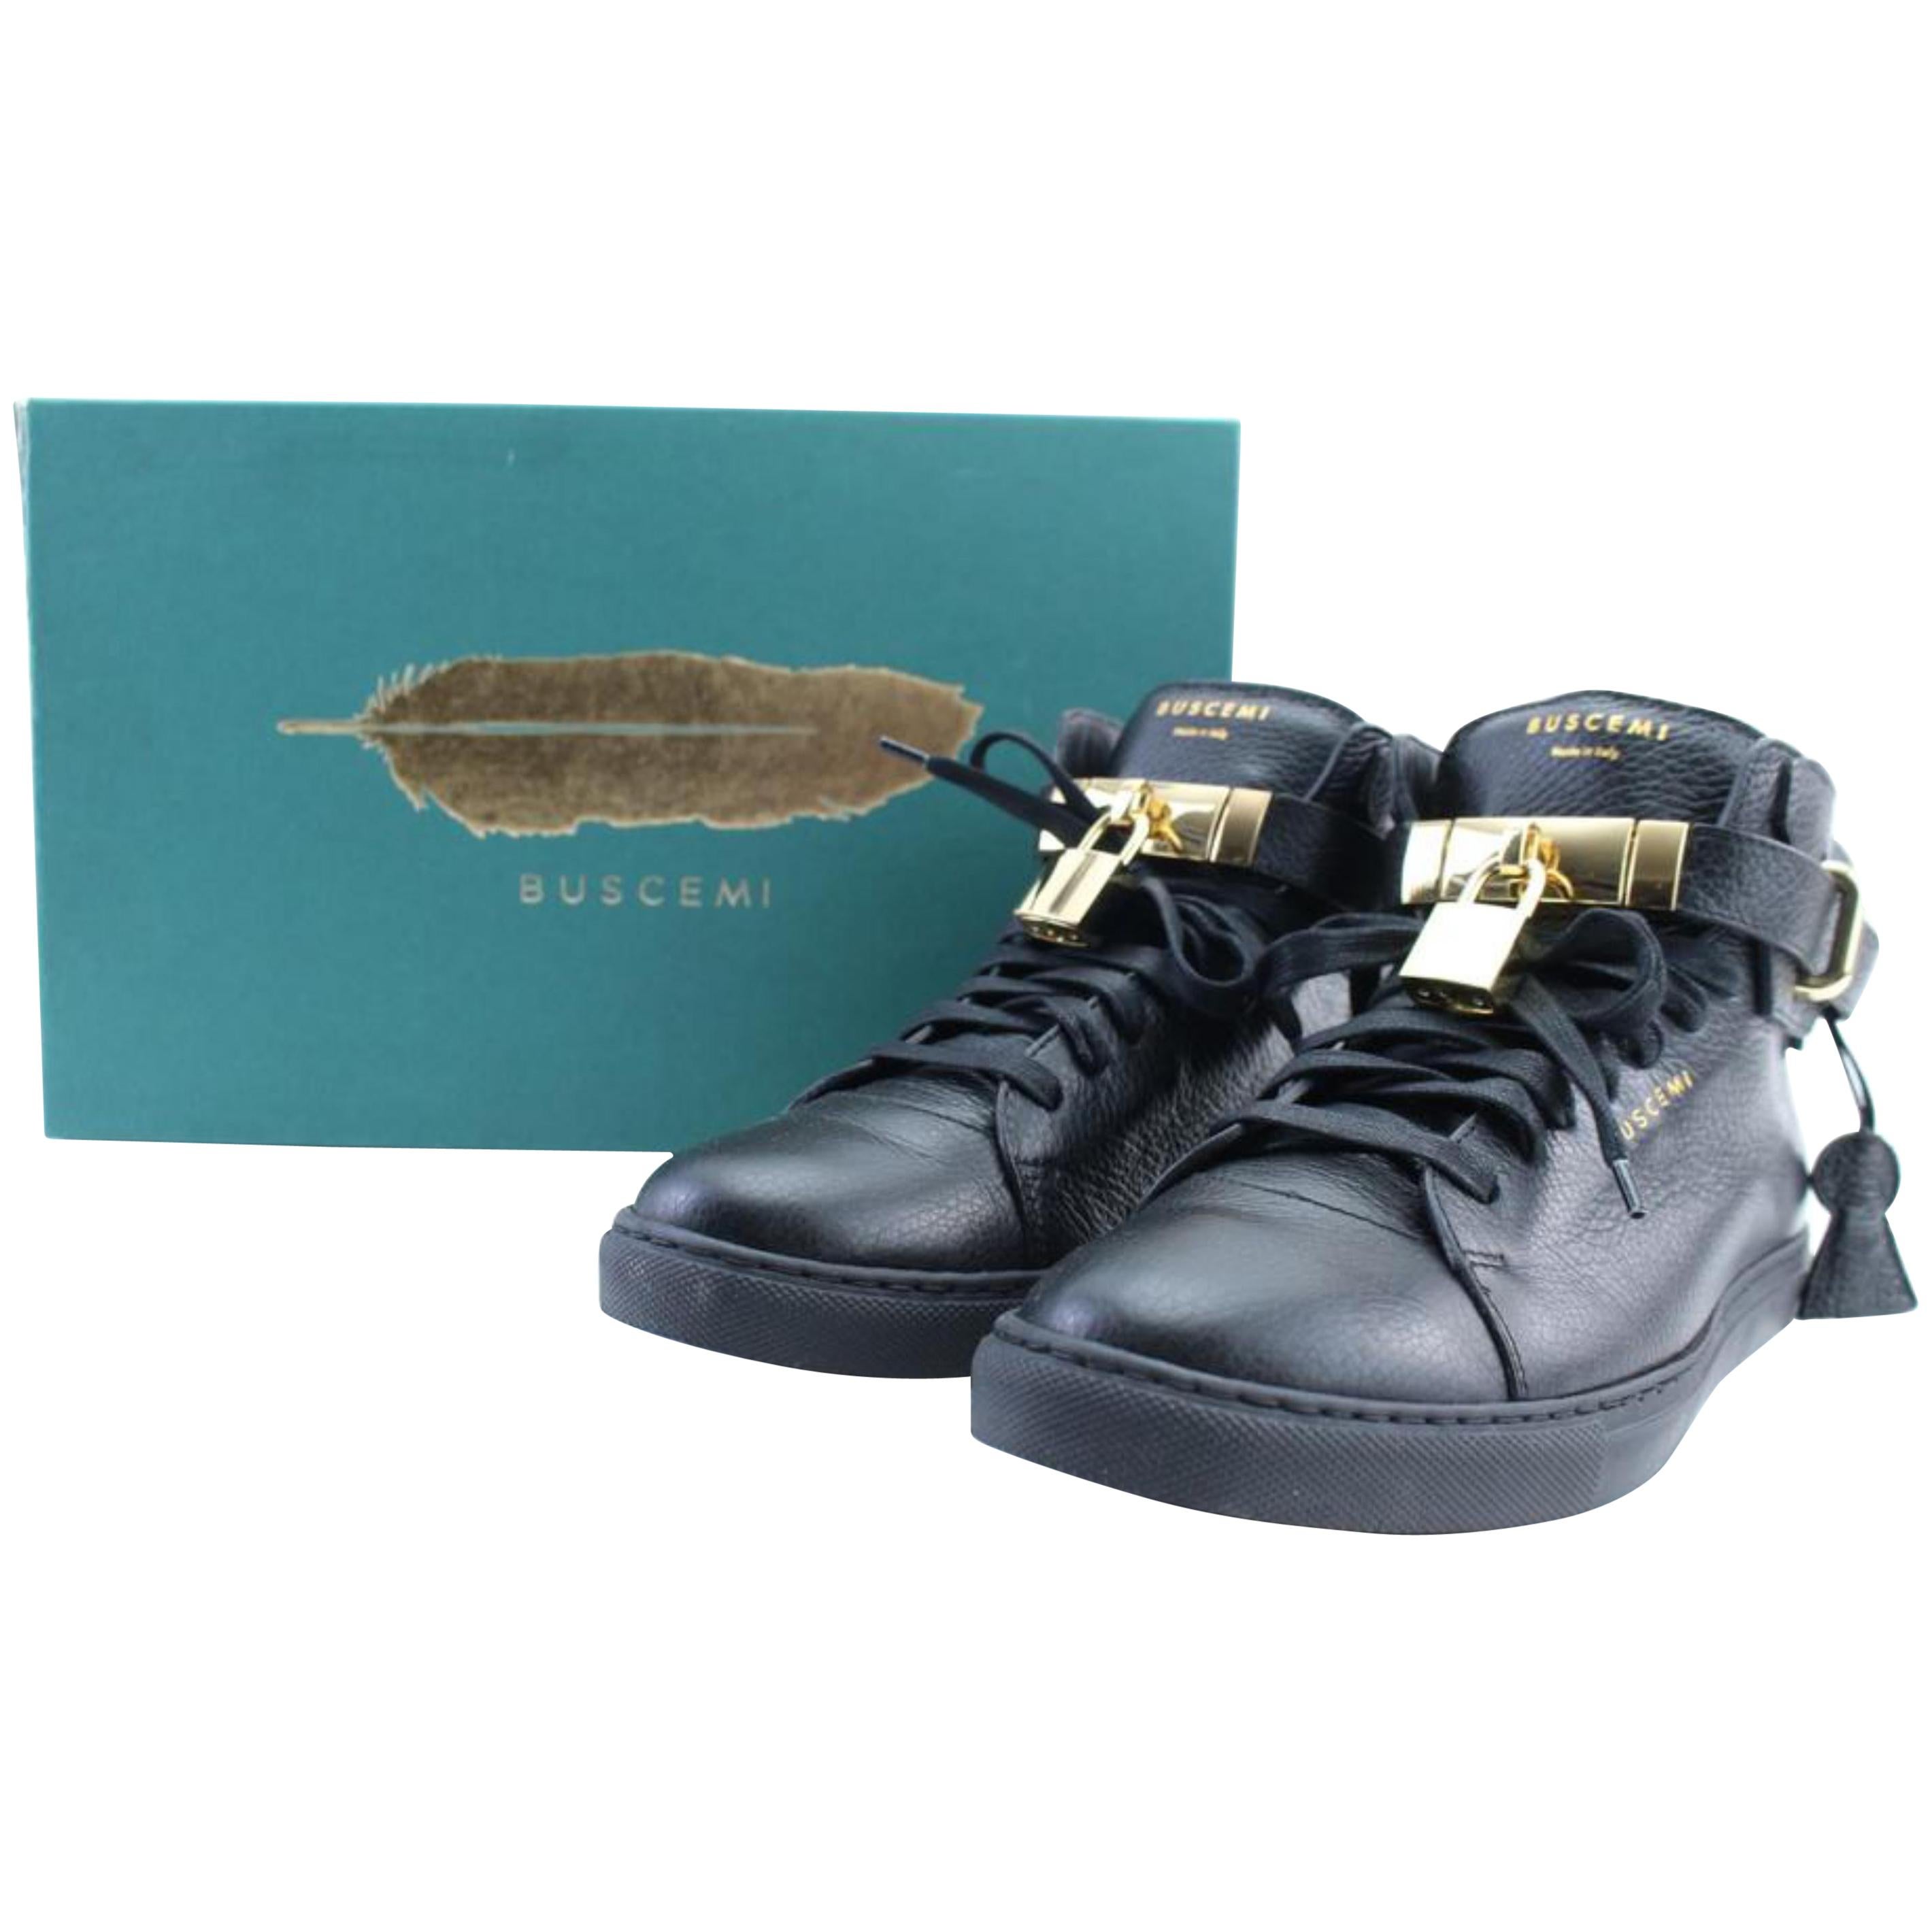 Buscemi Black 100mm High-top Padlock 22mr0212 Sneakers For Sale